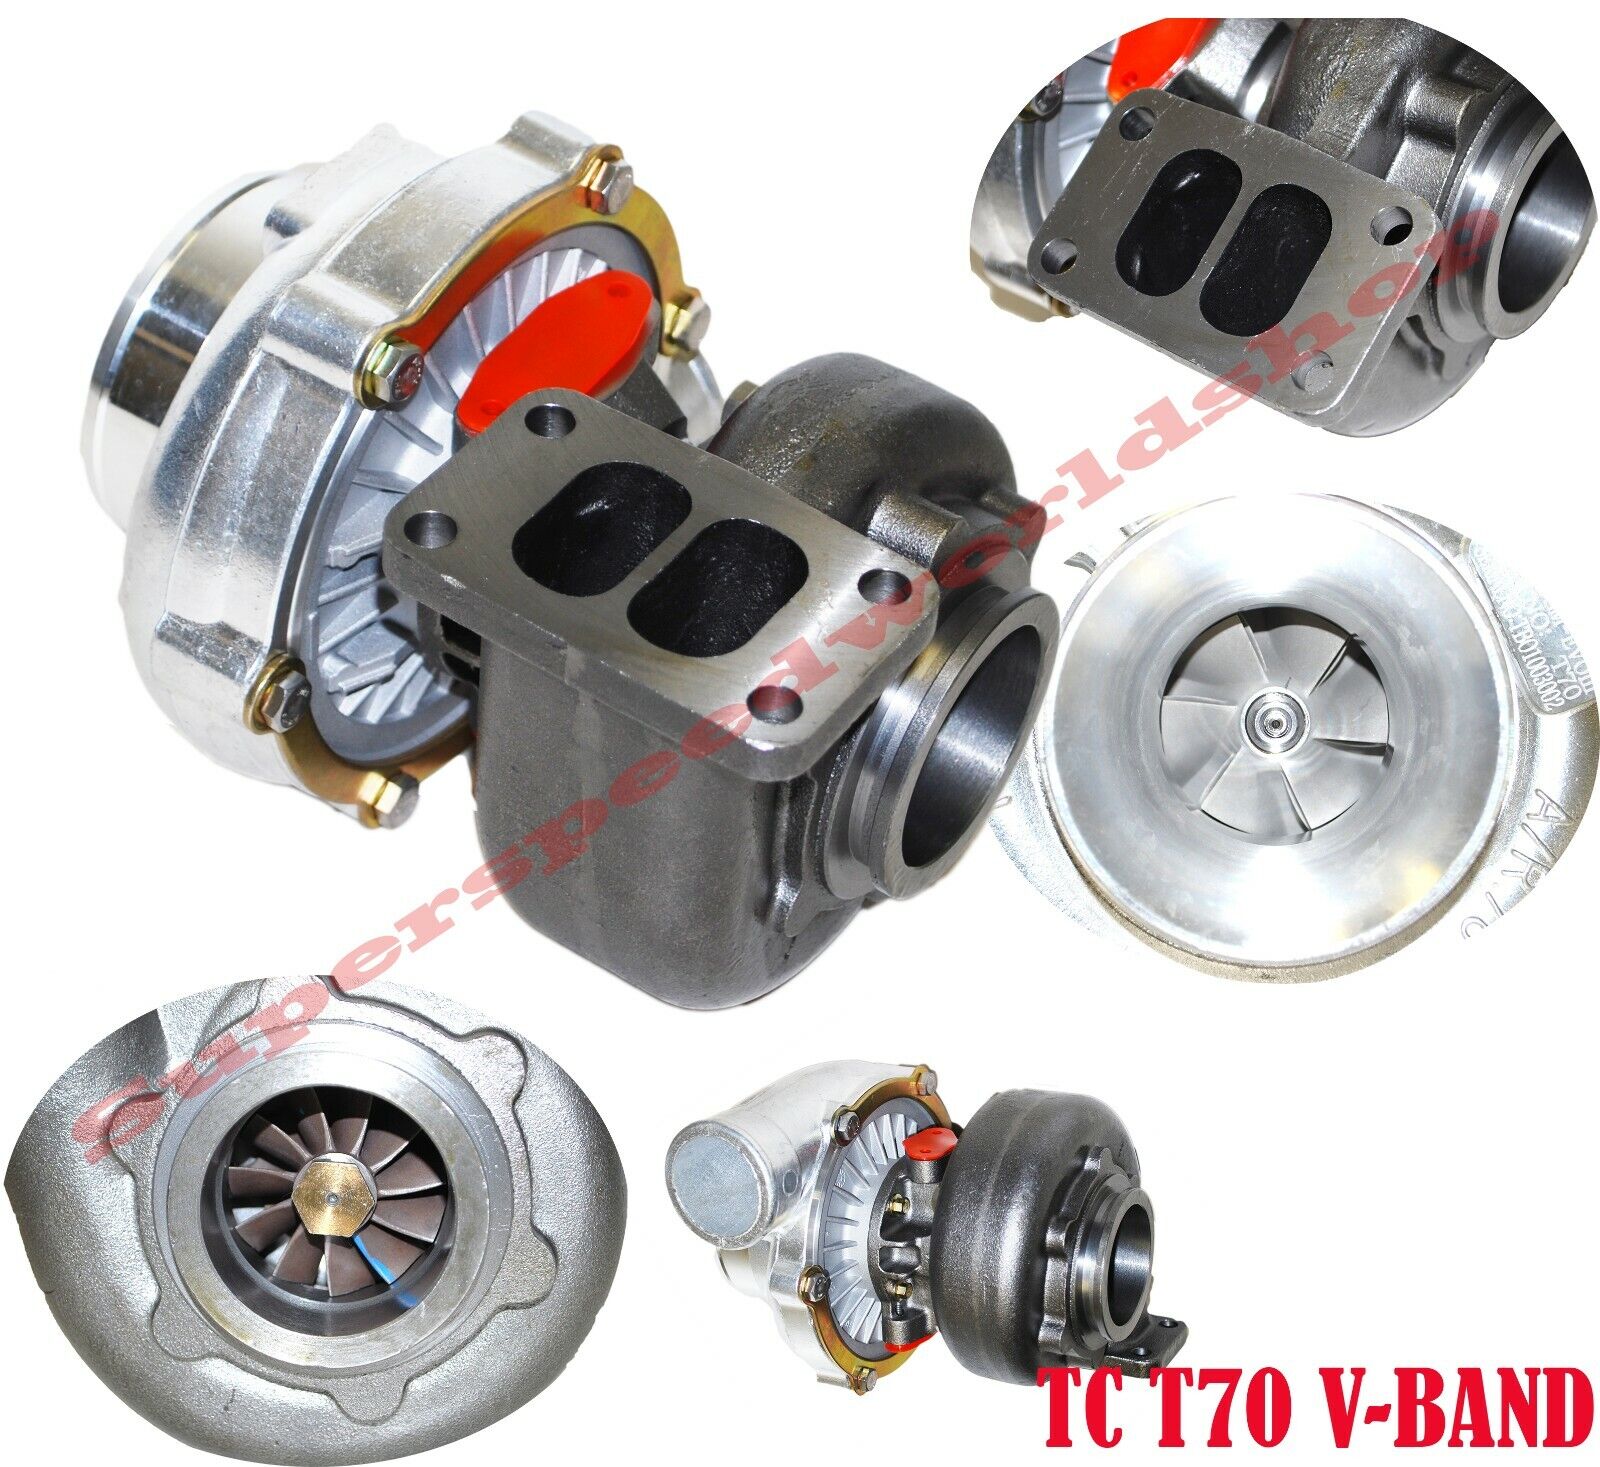 T70 Turbocharger Turbo Charger Exhaust T3 V-Band fit Supra RX7 RX8